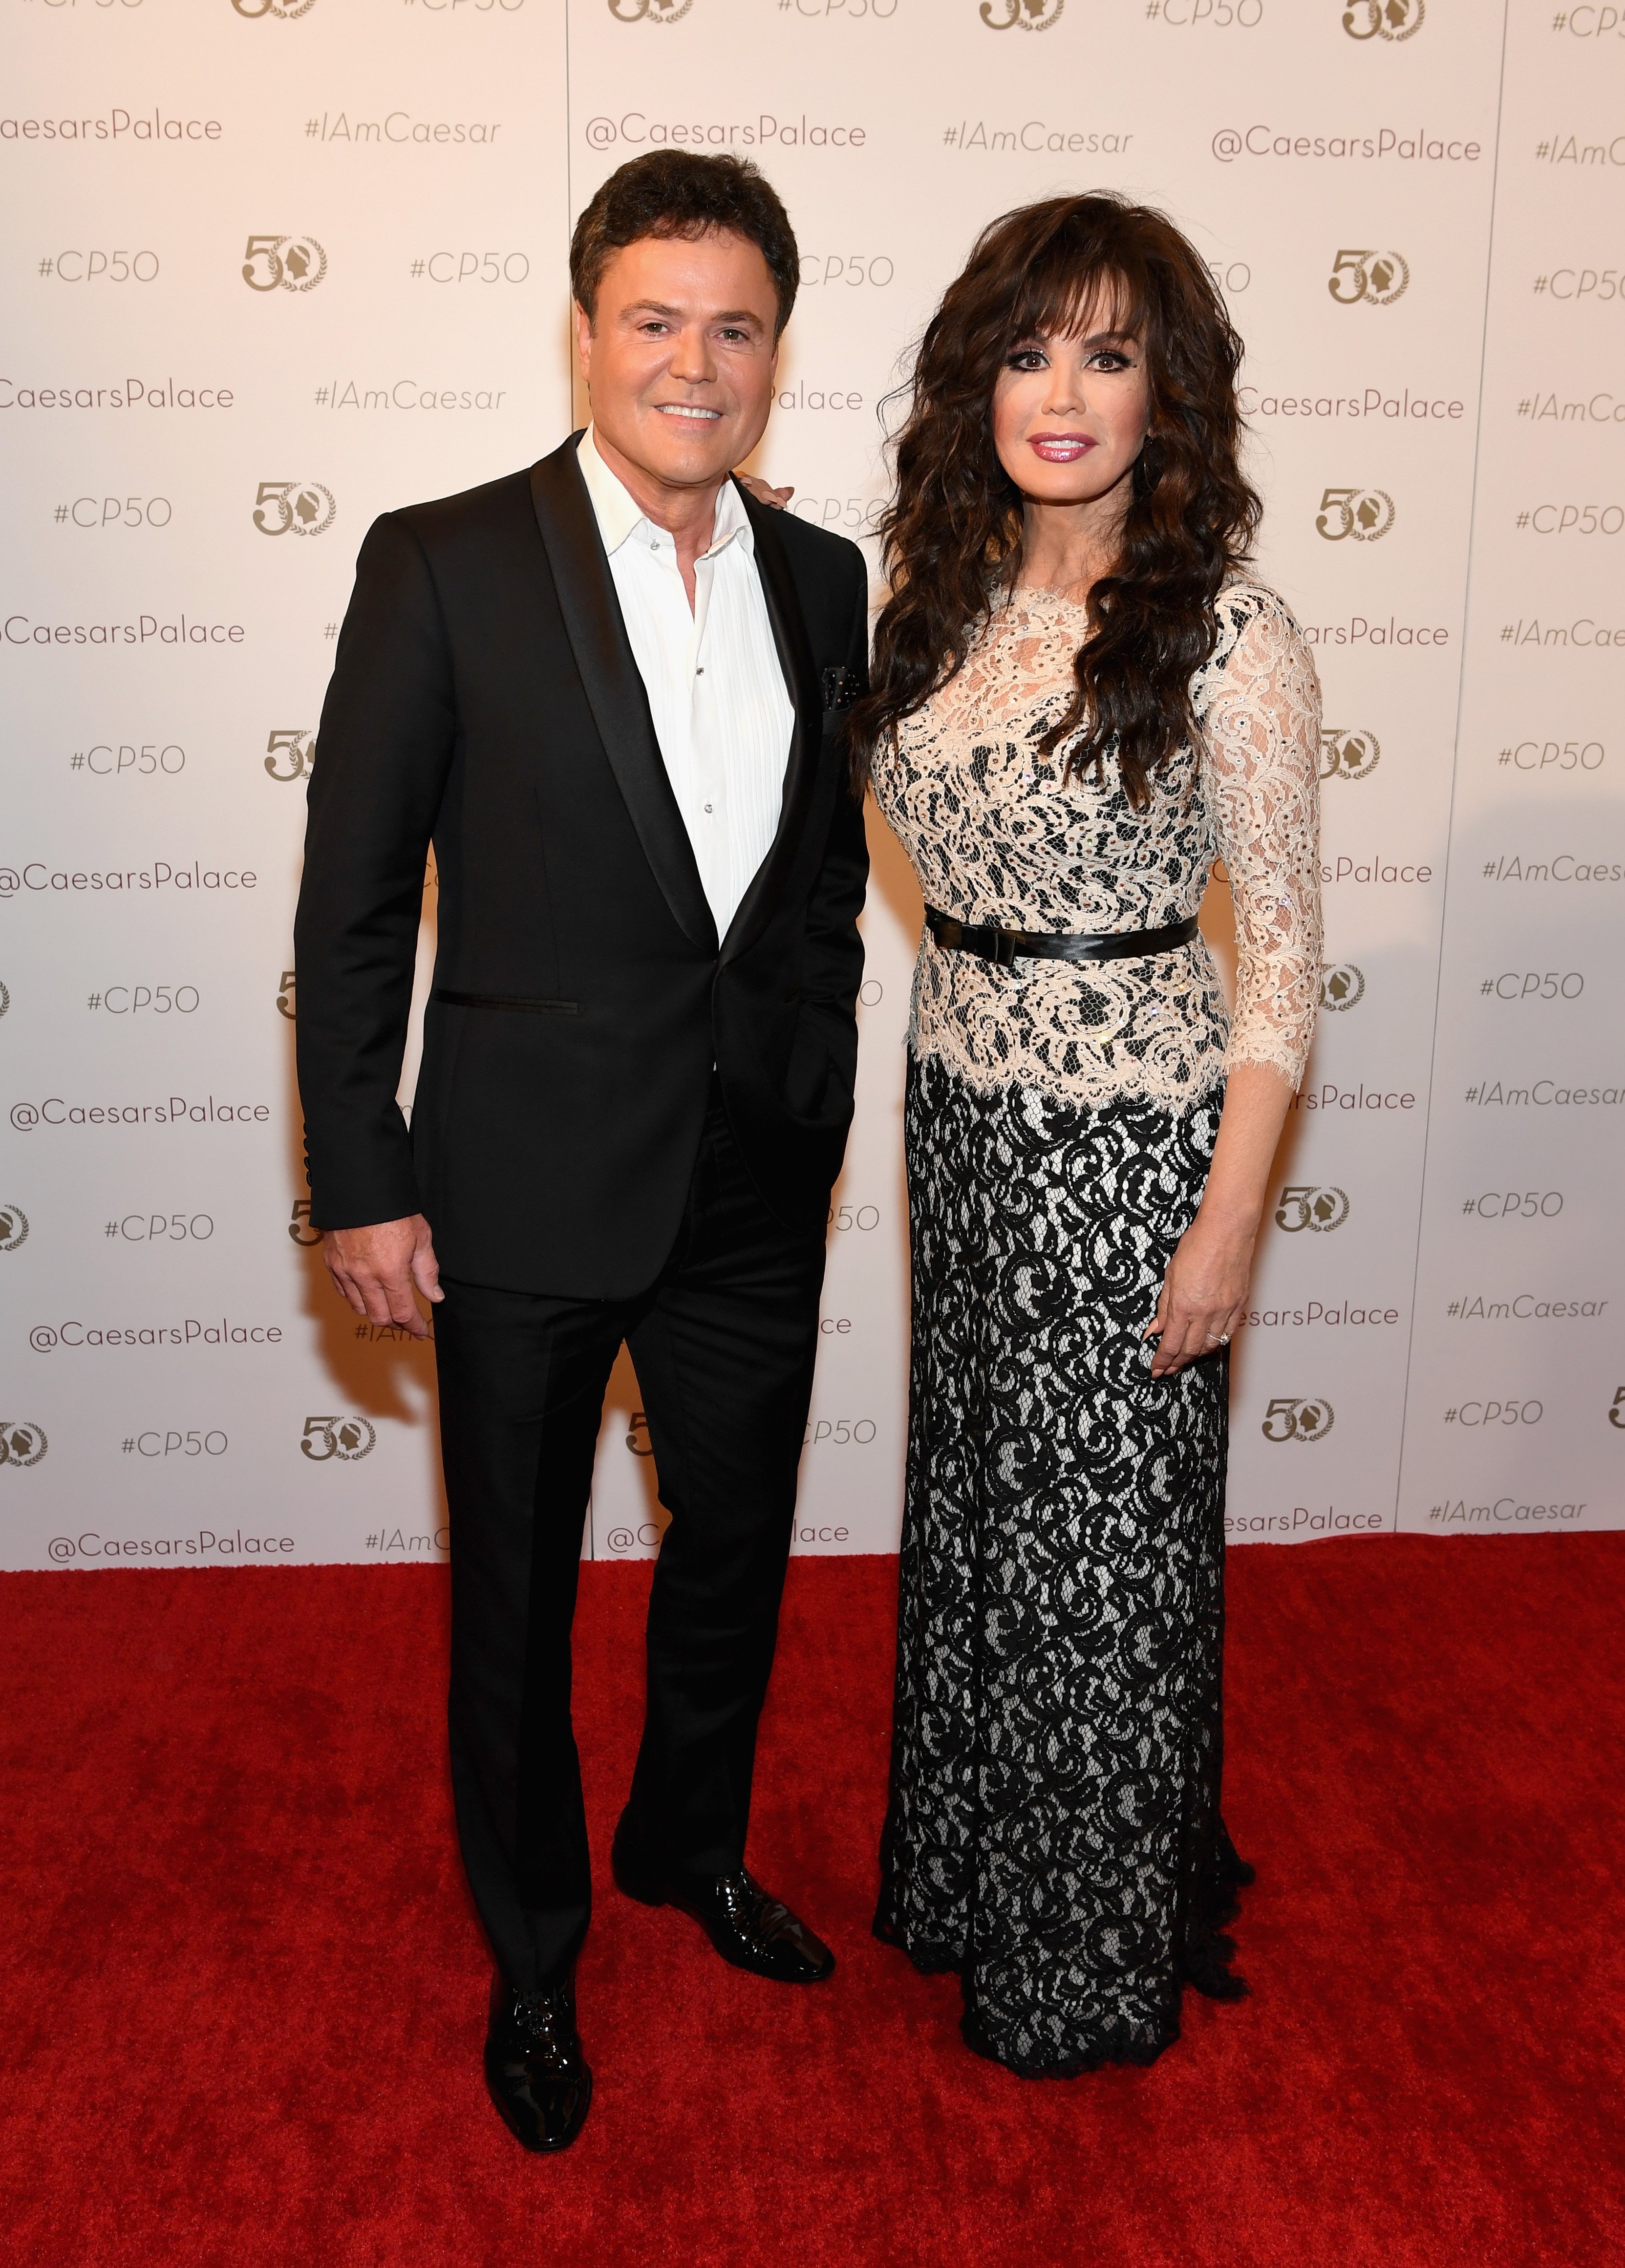 Donny Osmond and Marie Osmond at Caesars Palace on August 6, 2016, in Las Vegas, Nevada. | Source: Getty Images.